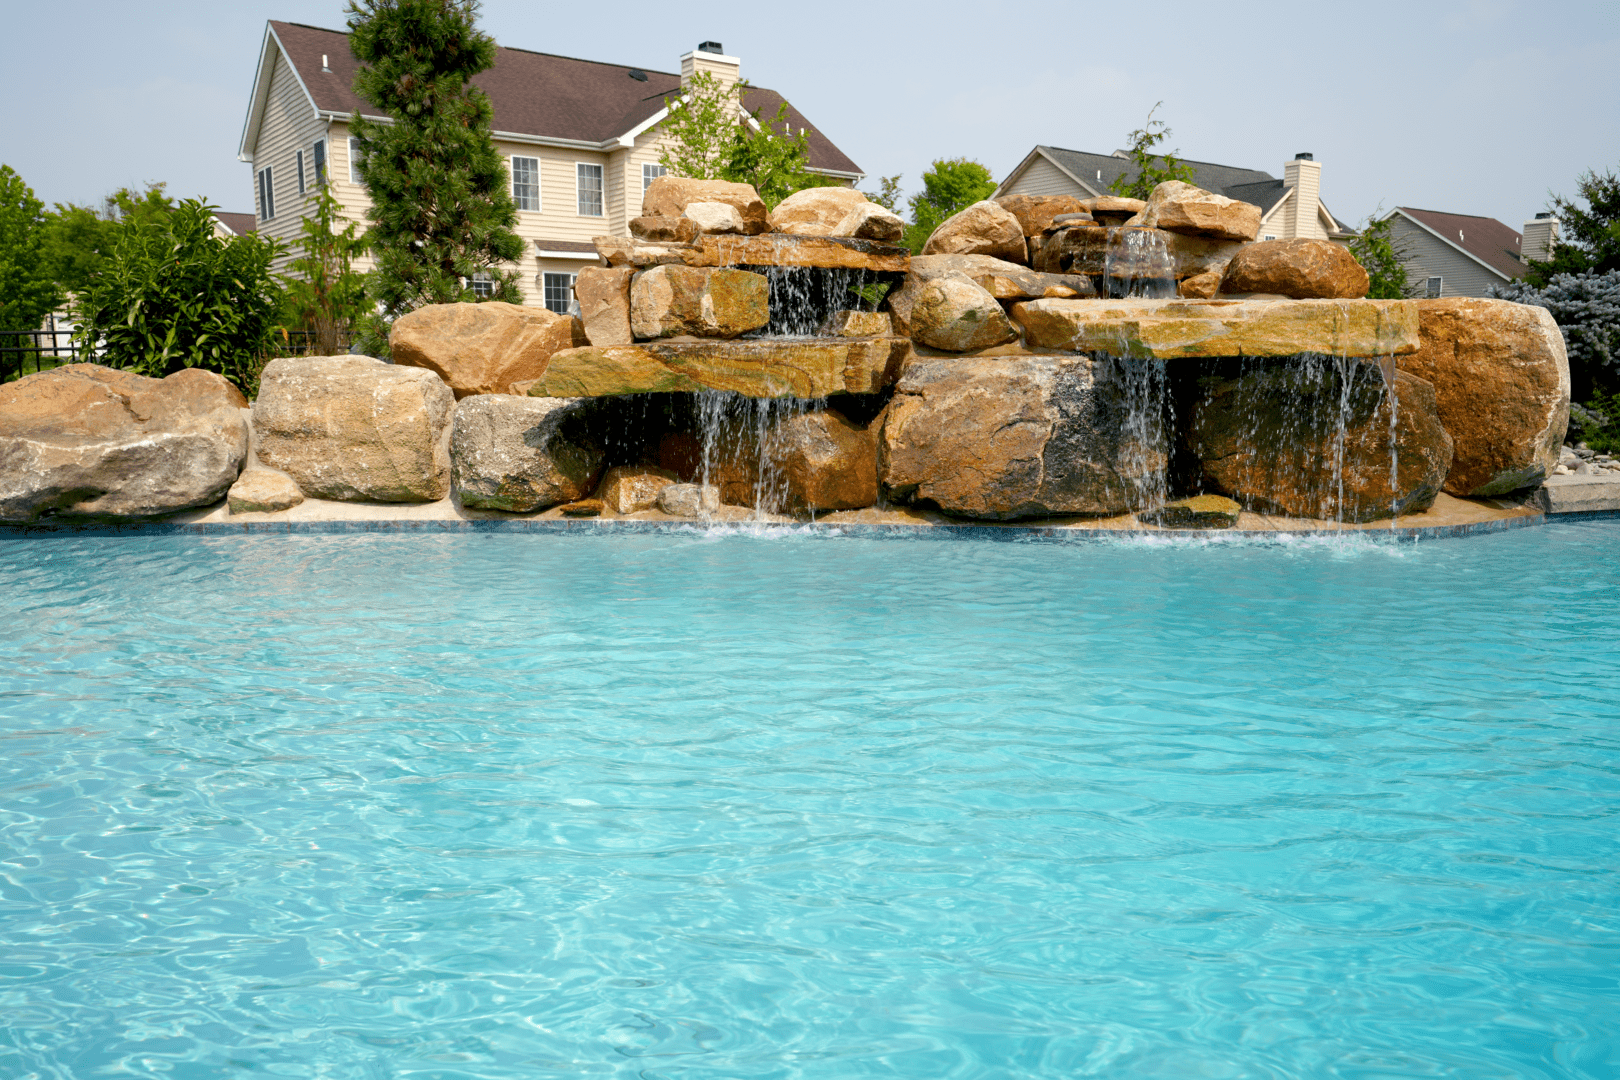 A pool with delightful water features, including a stunning waterfall.